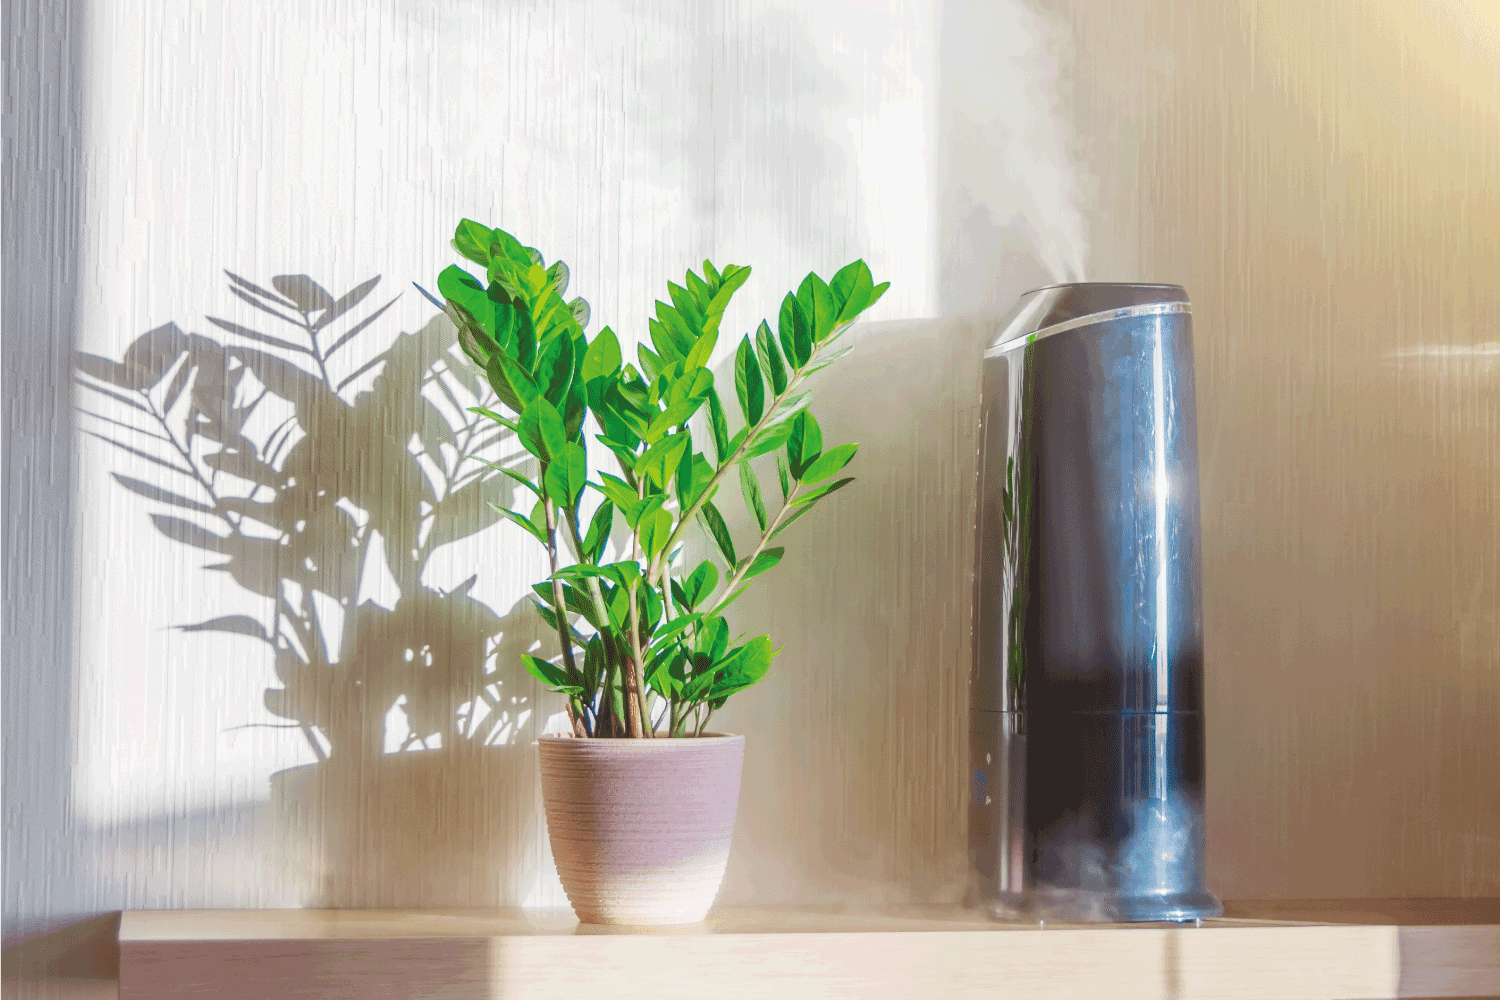 Ornamental deciduous houseplant Zamioculcas and a humidifier with steam on a sunlit shelf in a home interior